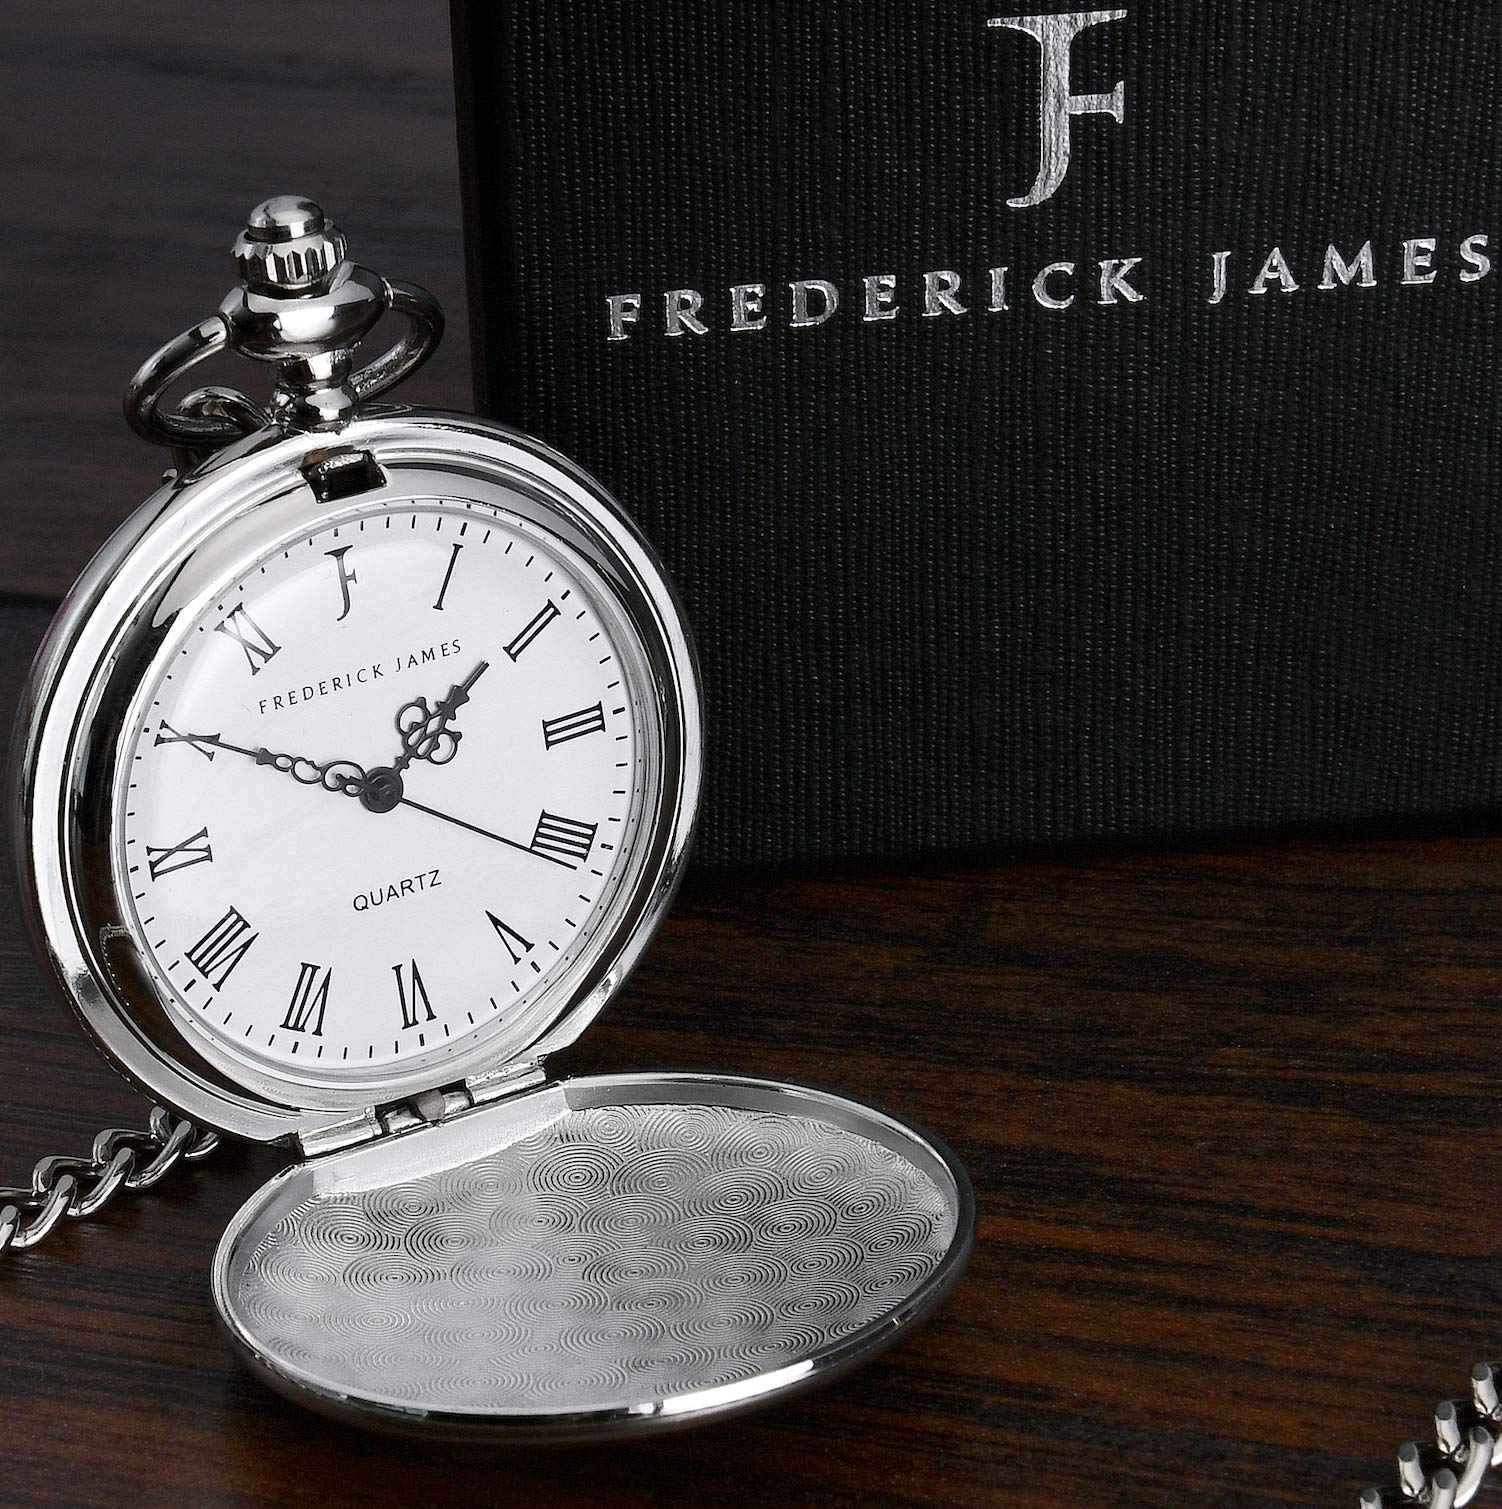 FJ FREDERICK JAMES Father of The Bride Gifts from Daughter - 'to The Father of The Bride.Thank You for Being by My Side' Pocket Watch I Dad of The Bride Gifts I Wedding Gift for Father of The Bride